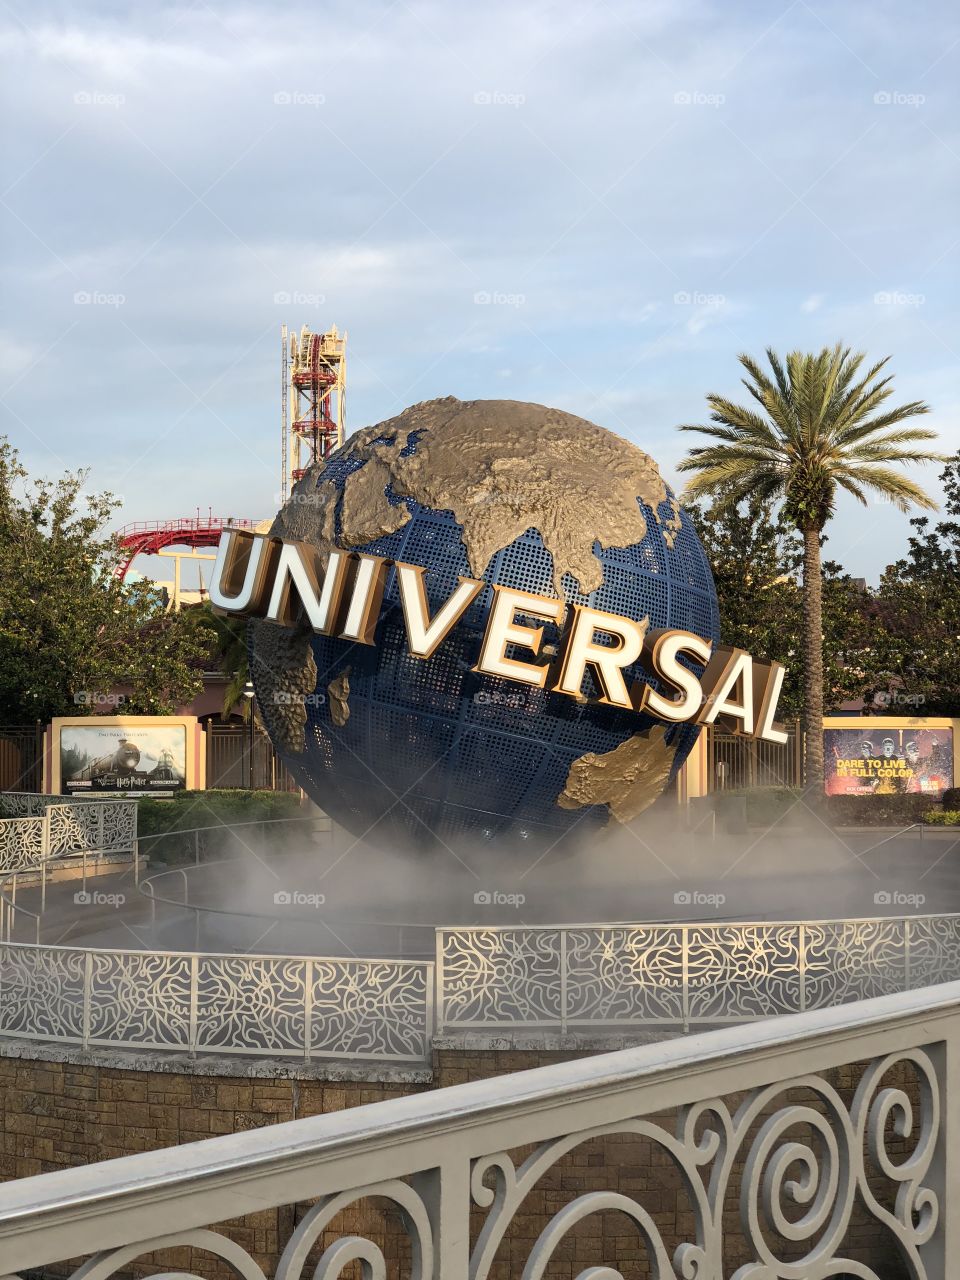 Perfect angle of the revolving Universal Studios globe with glimpses of the park in the background. Beautiful day with great lighting. 